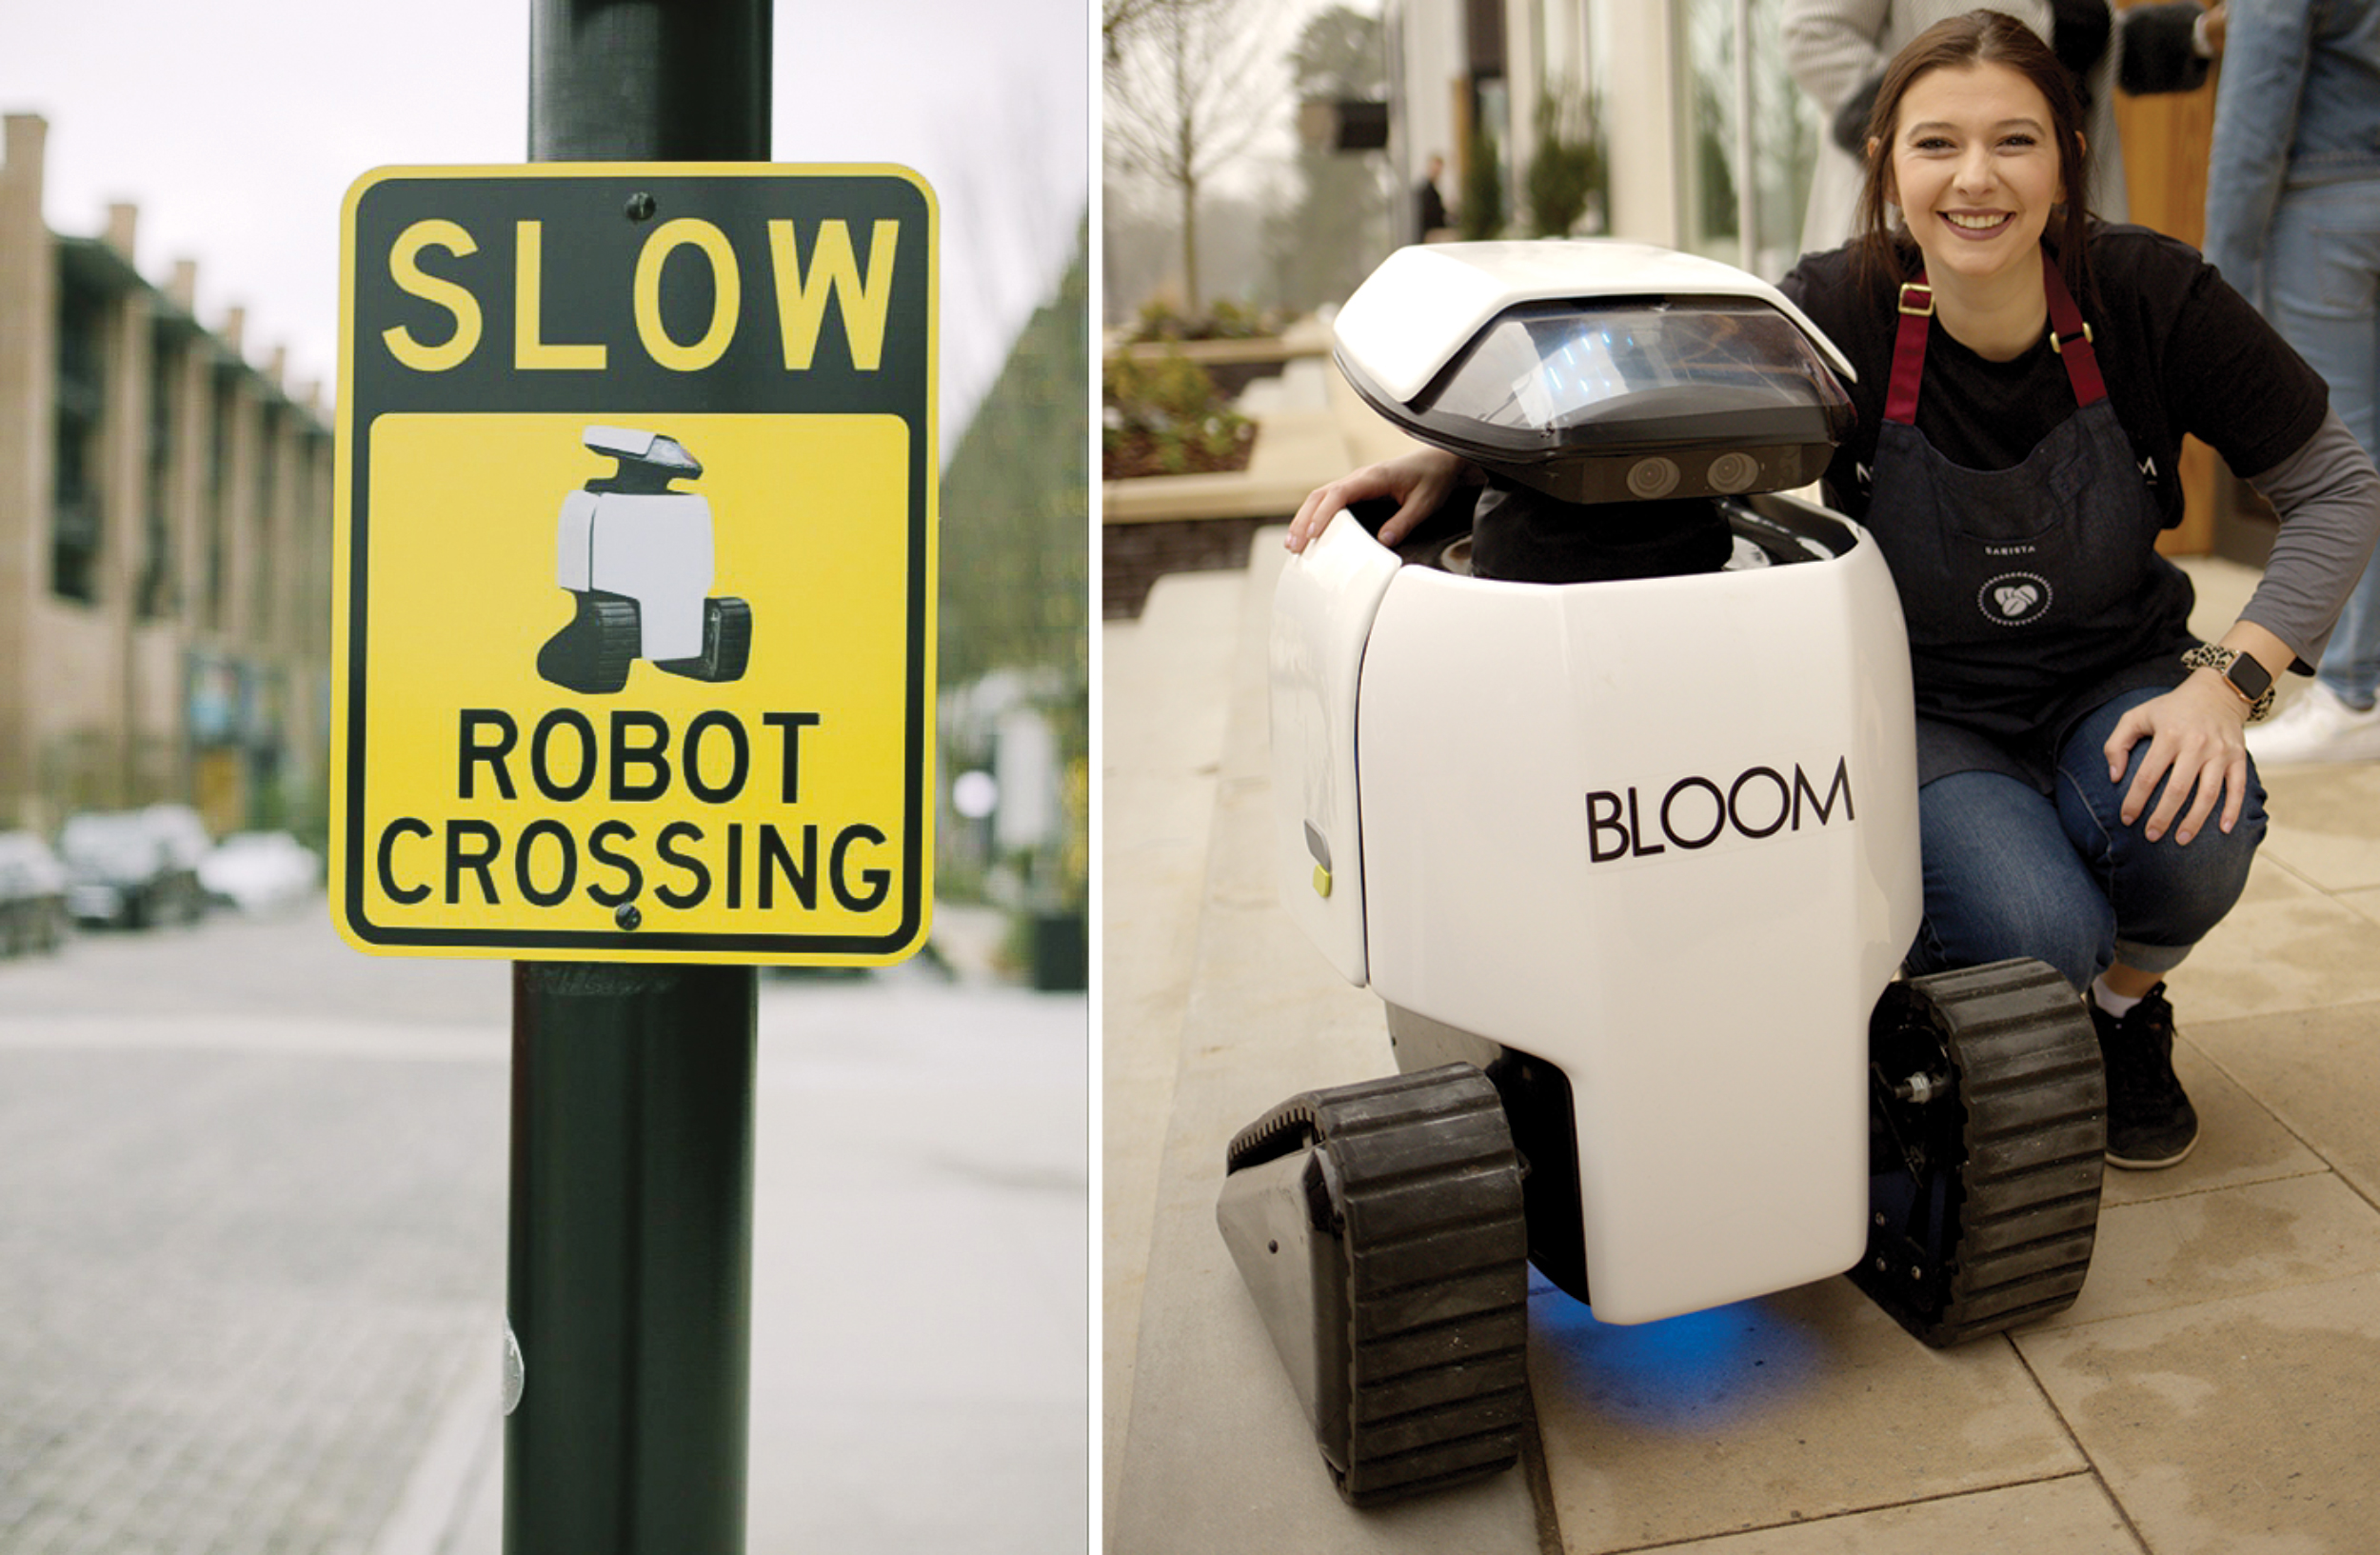 Crossings nearby the store allow the two delivery robots safe passage through the neighborhood.